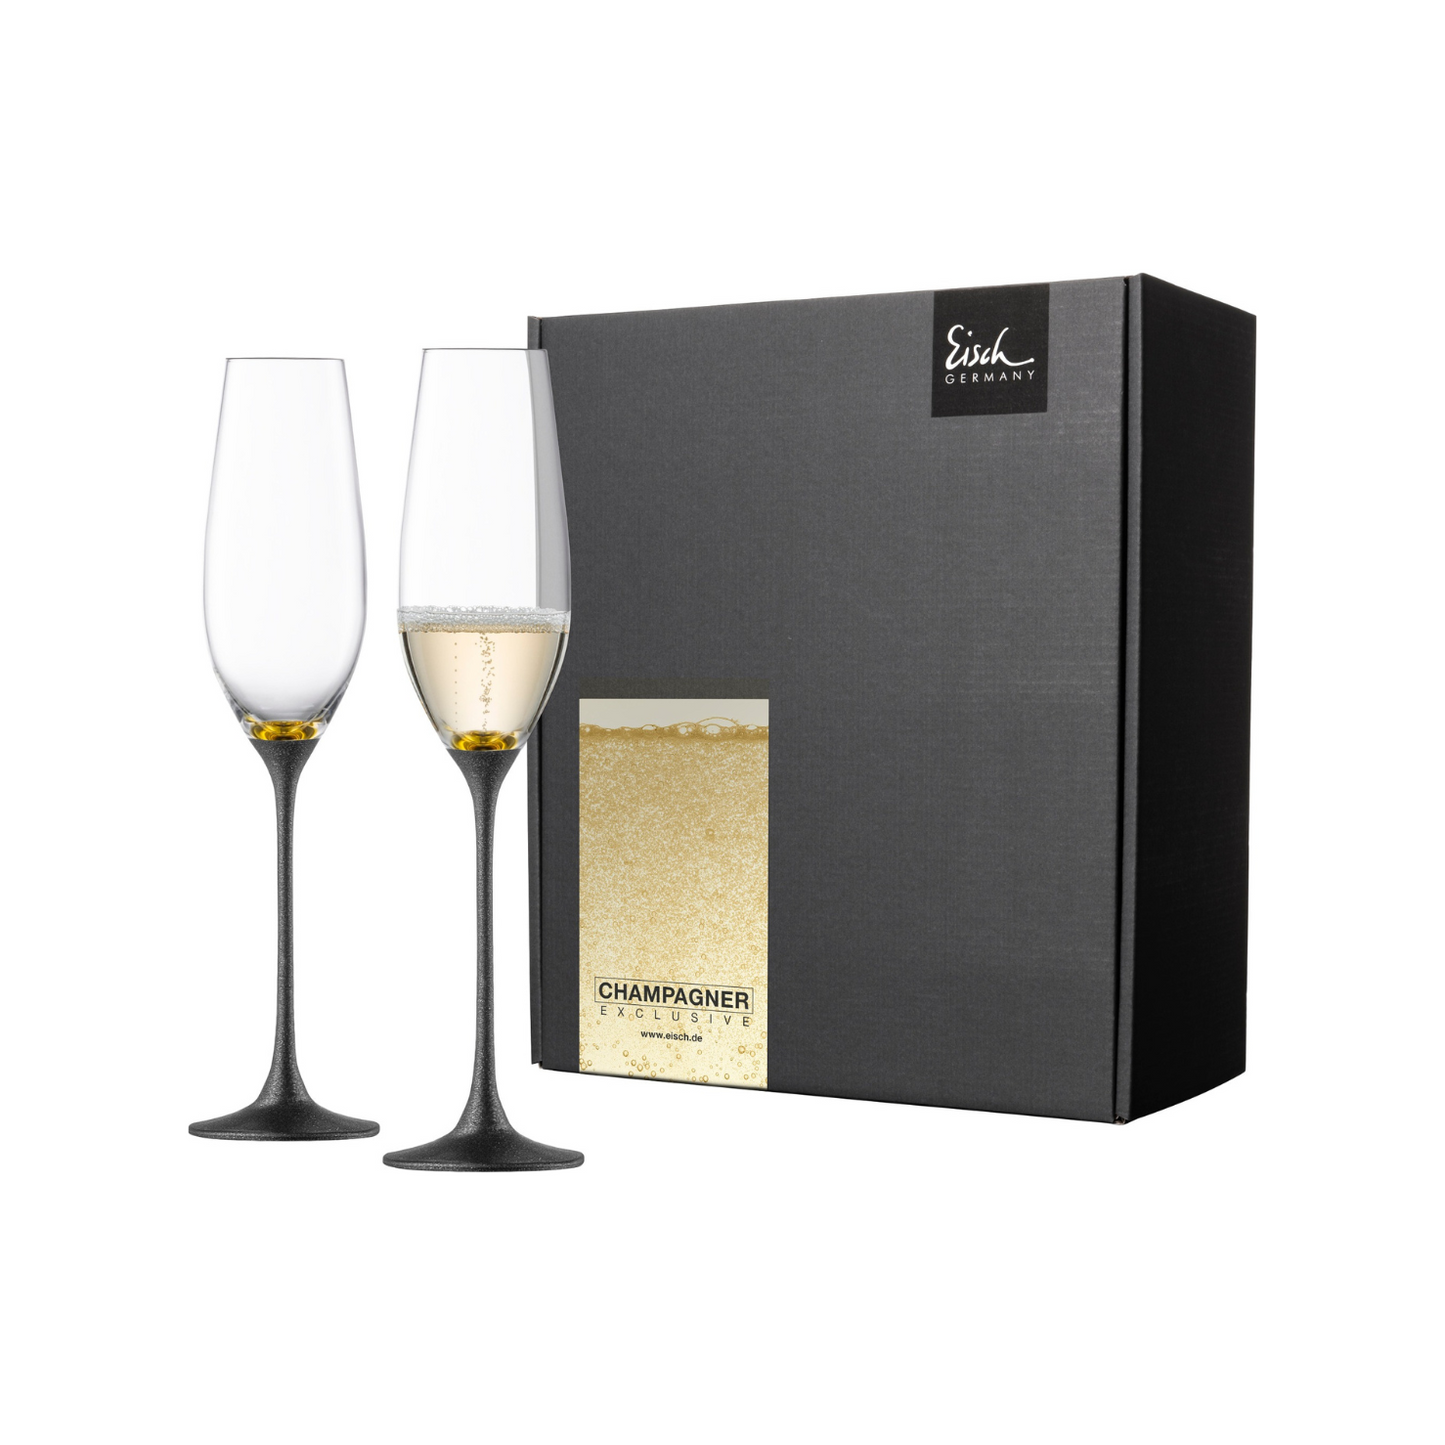 Champagne Exclusive Glass, Gold & Black, Set of 2